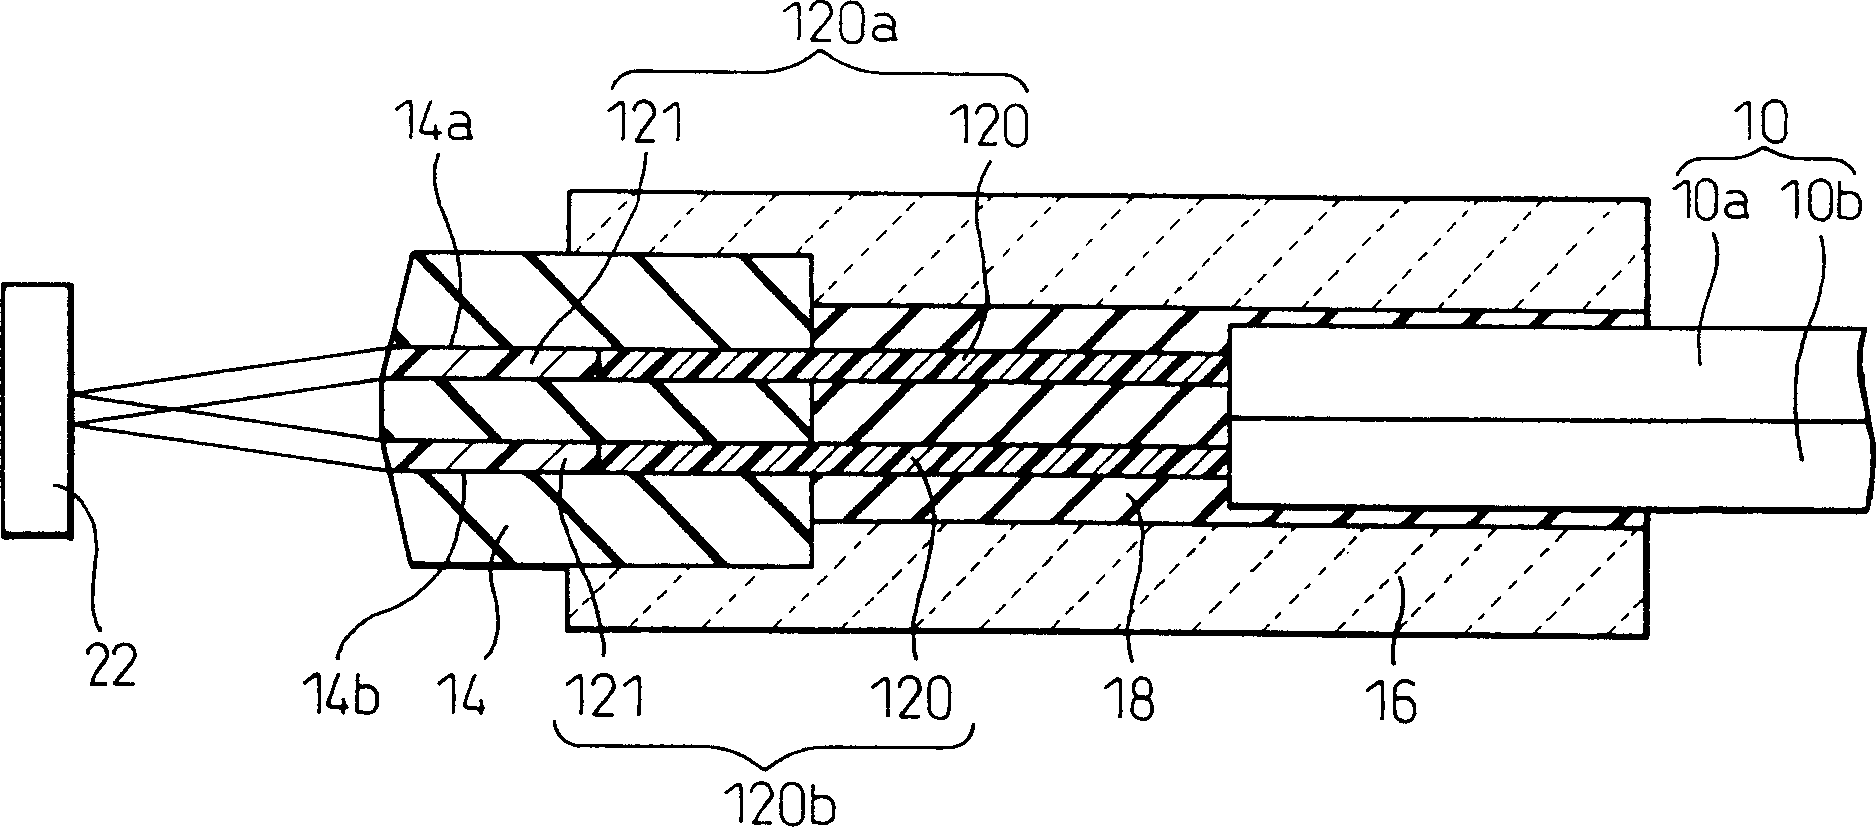 Optical collimator structure